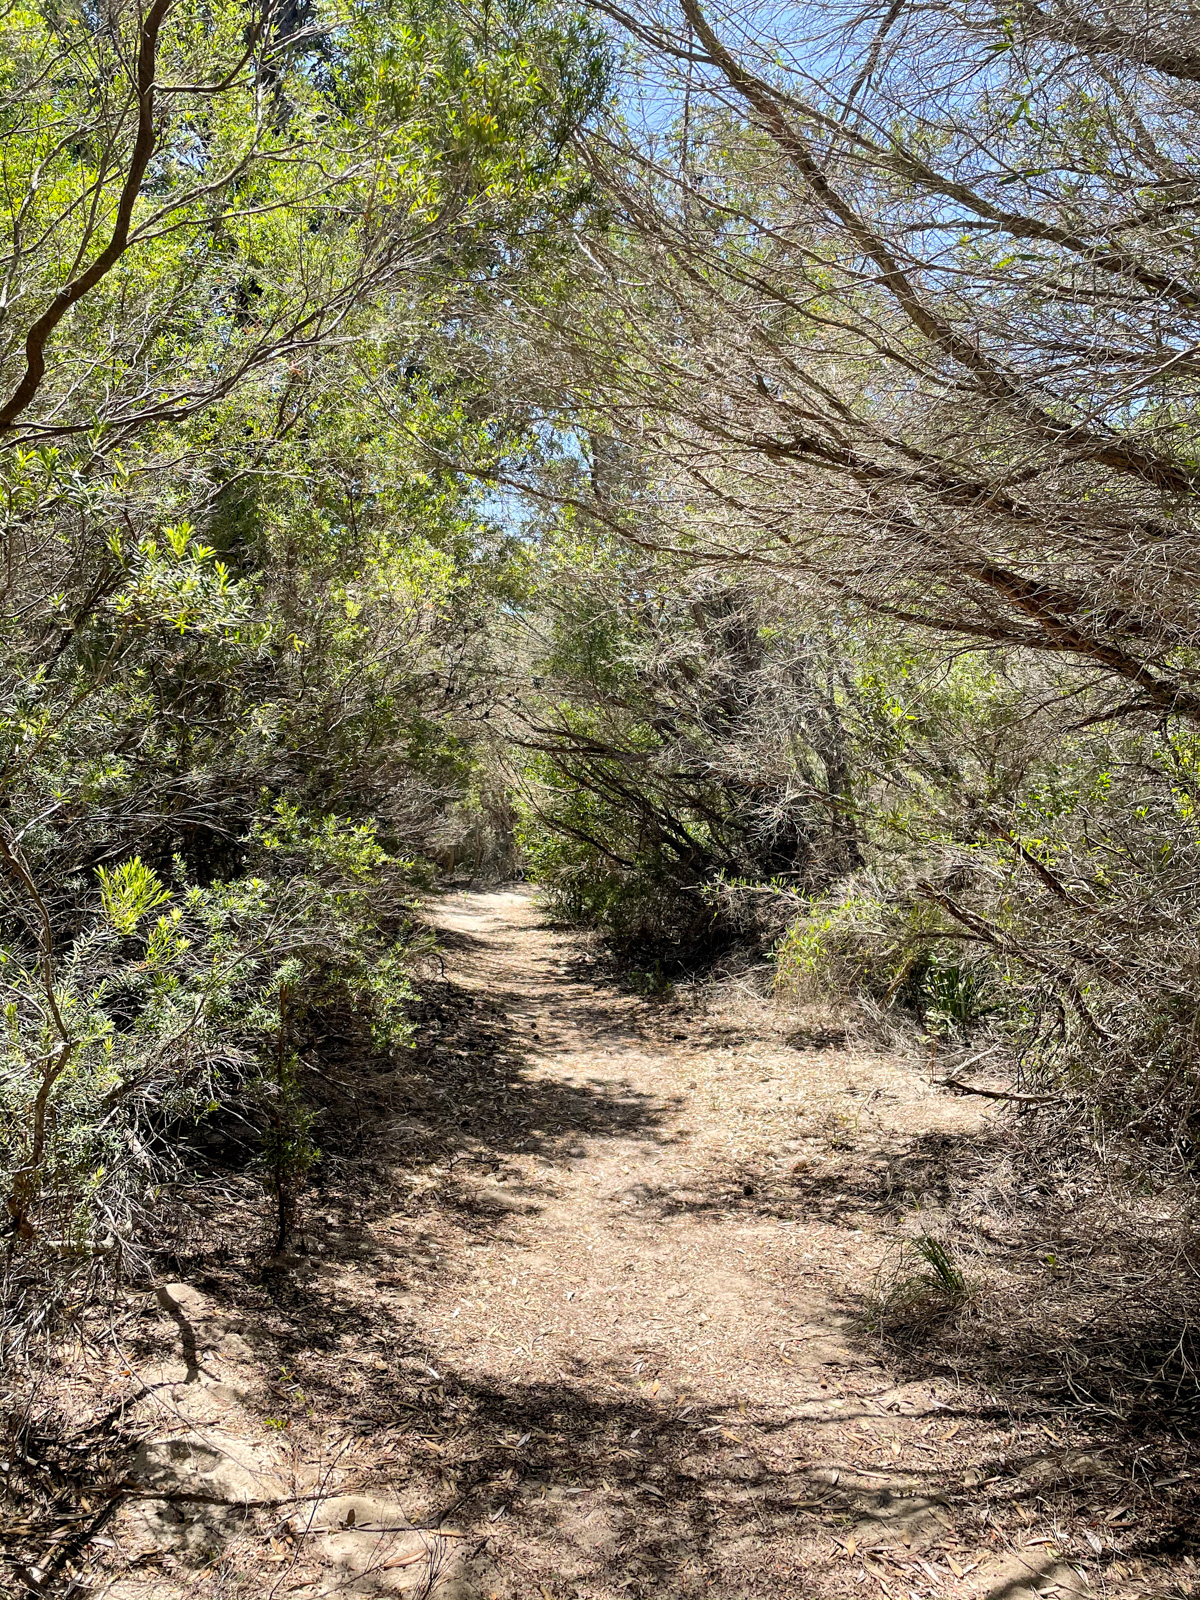 A view of a nature trail between trees with very little foliage